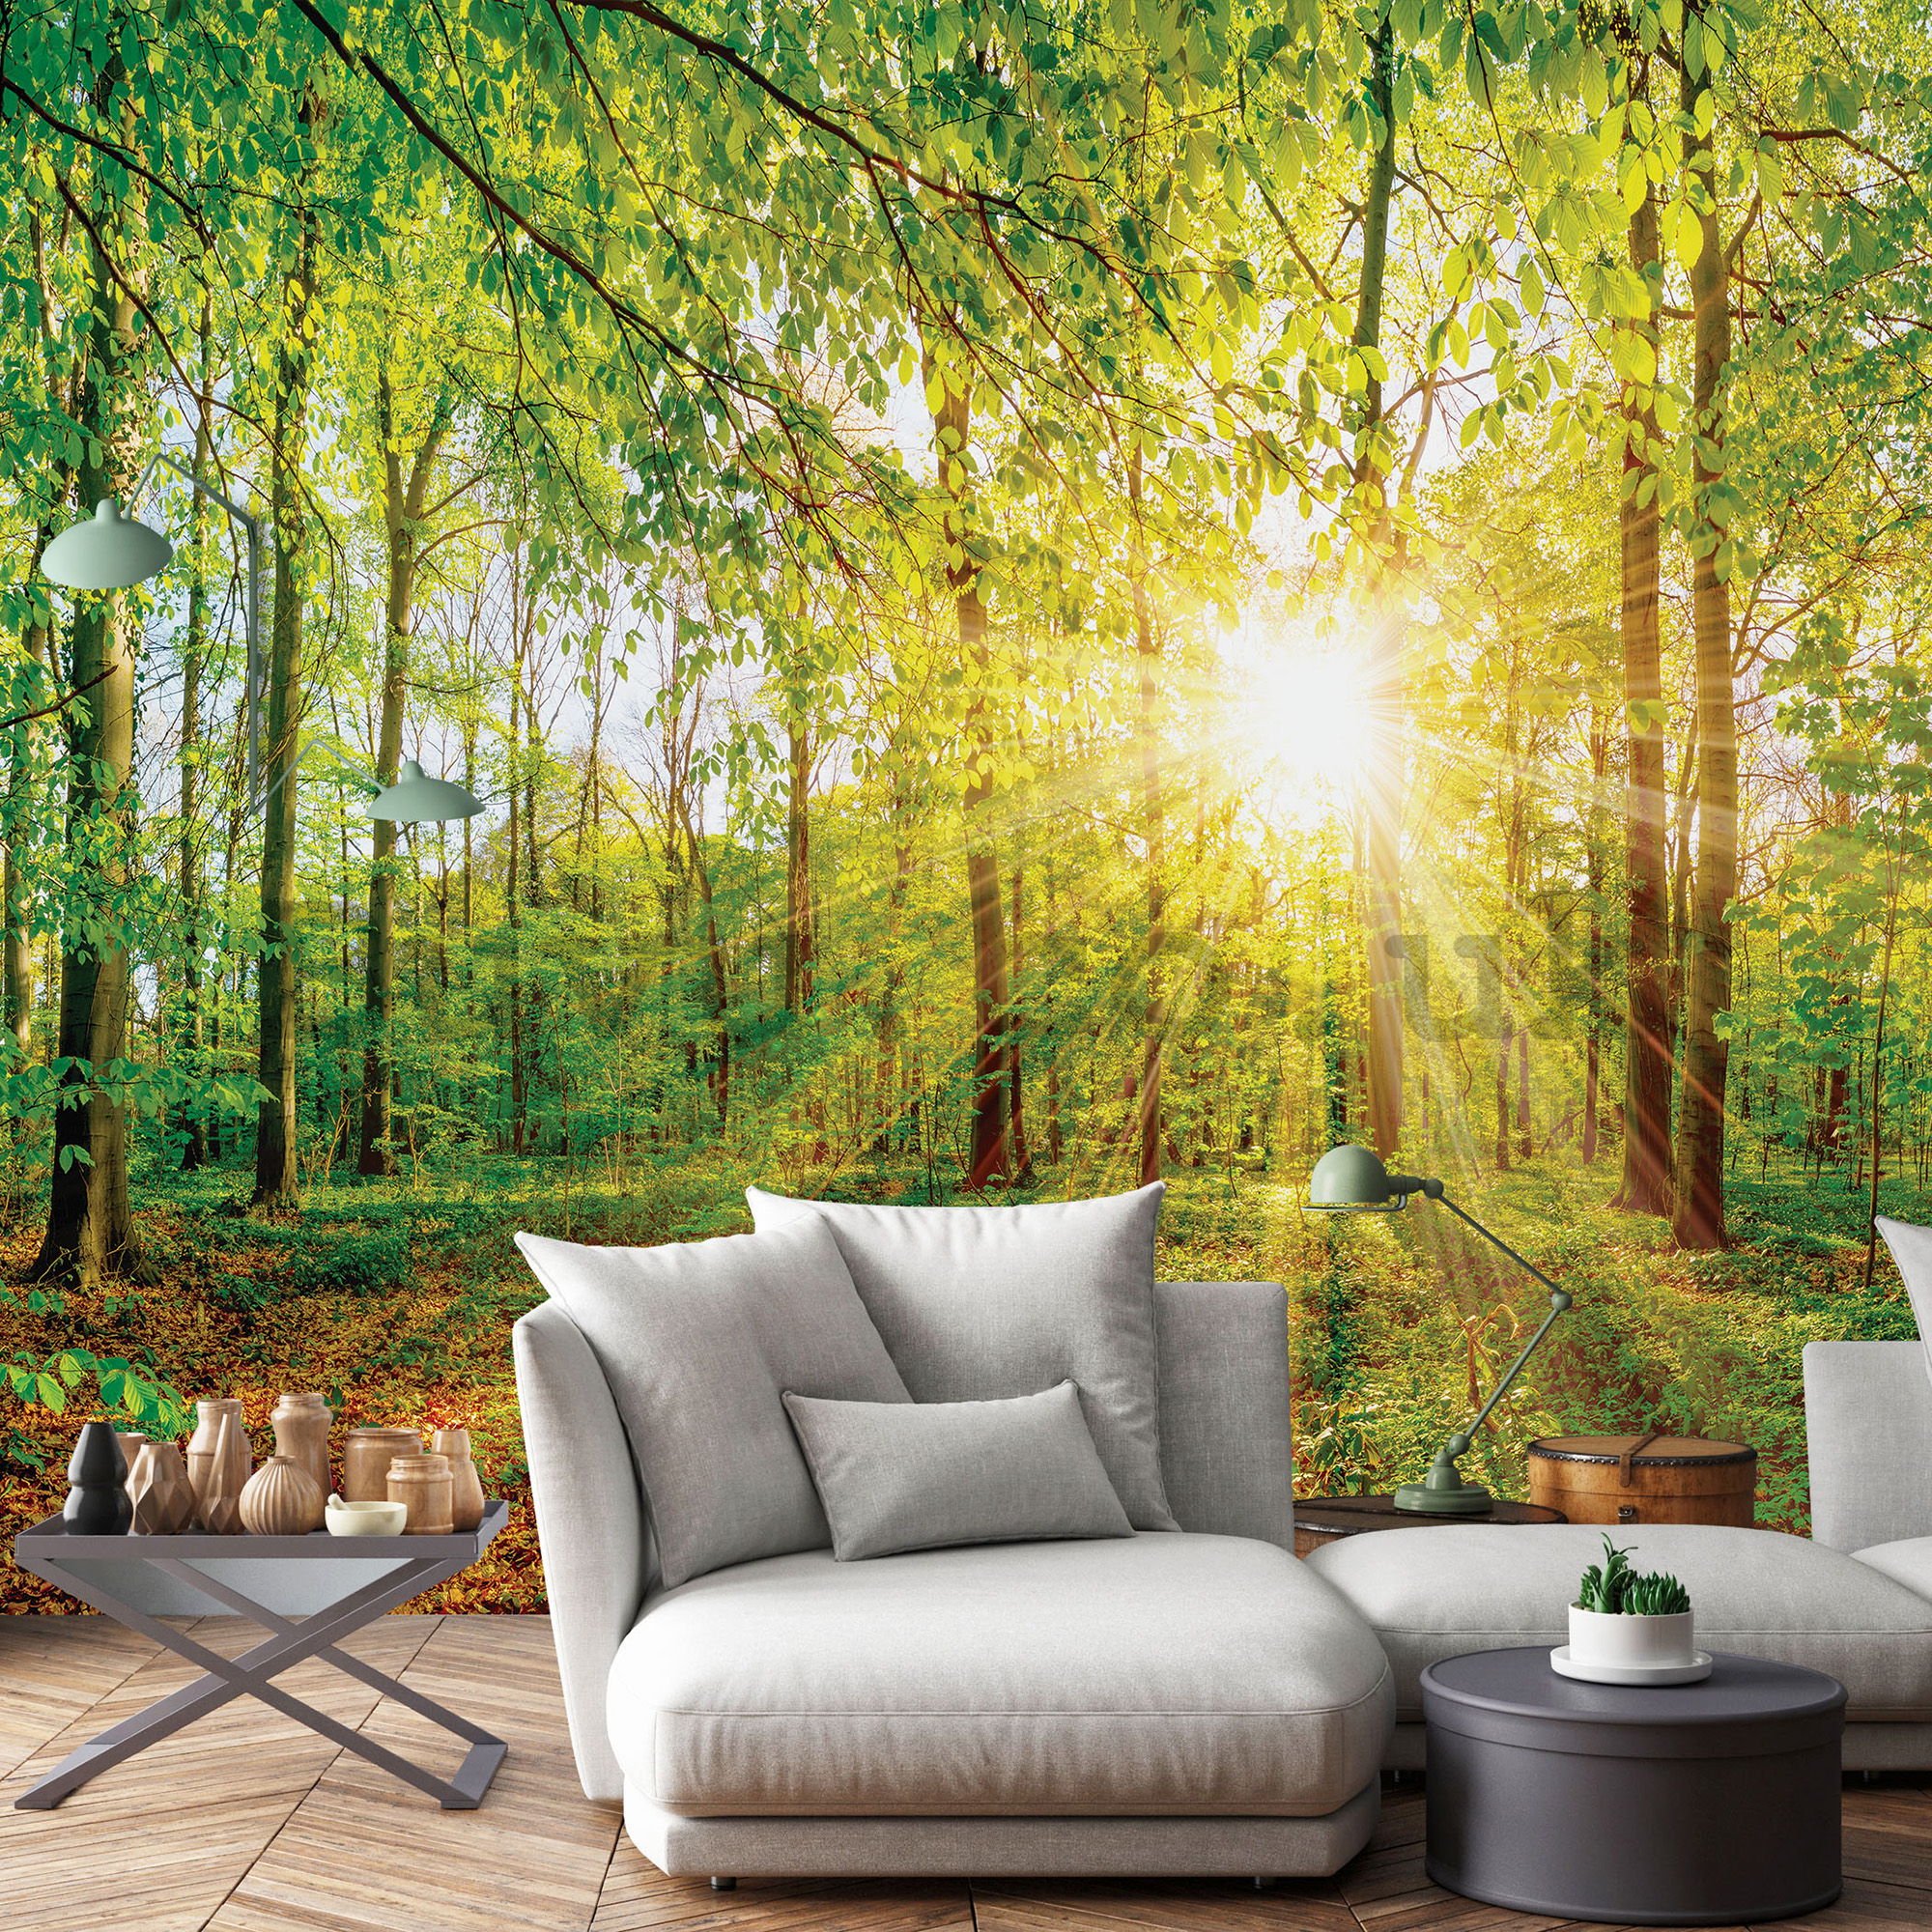 Wall mural vlies: View of the forest - 254x368 cm